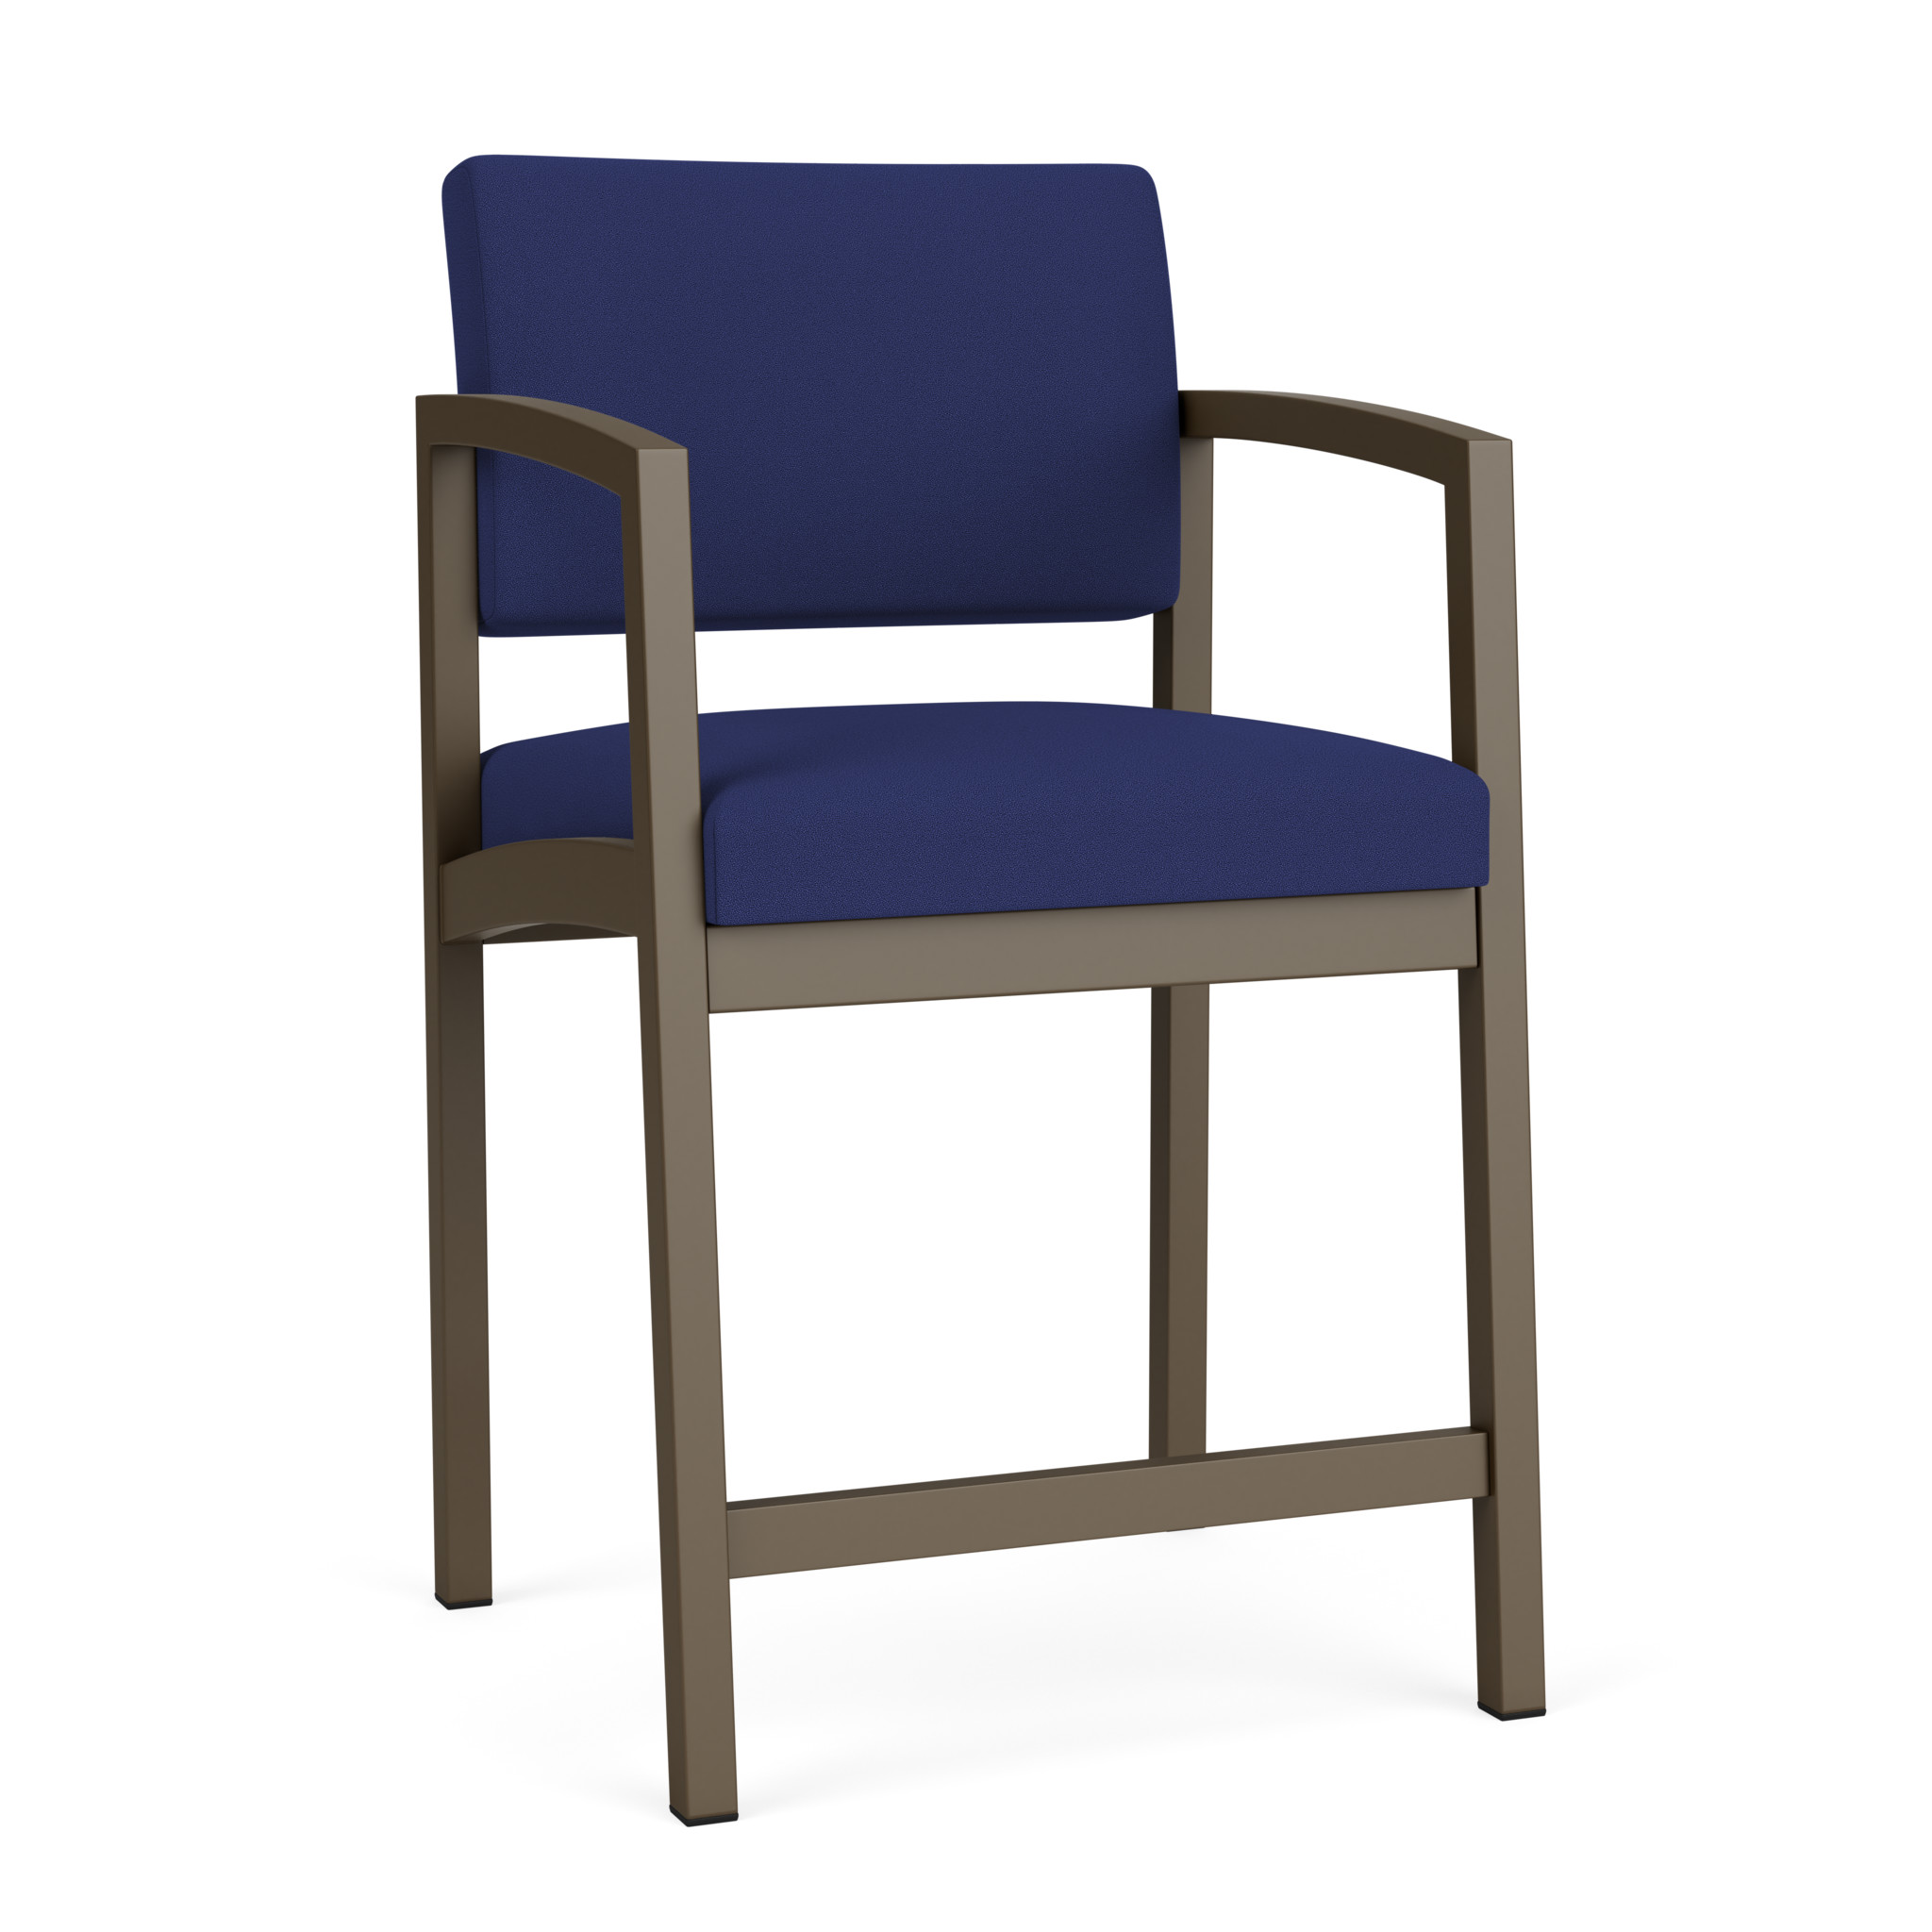 Lenox Steel Hip Chair with Arms by Lesro Furniture